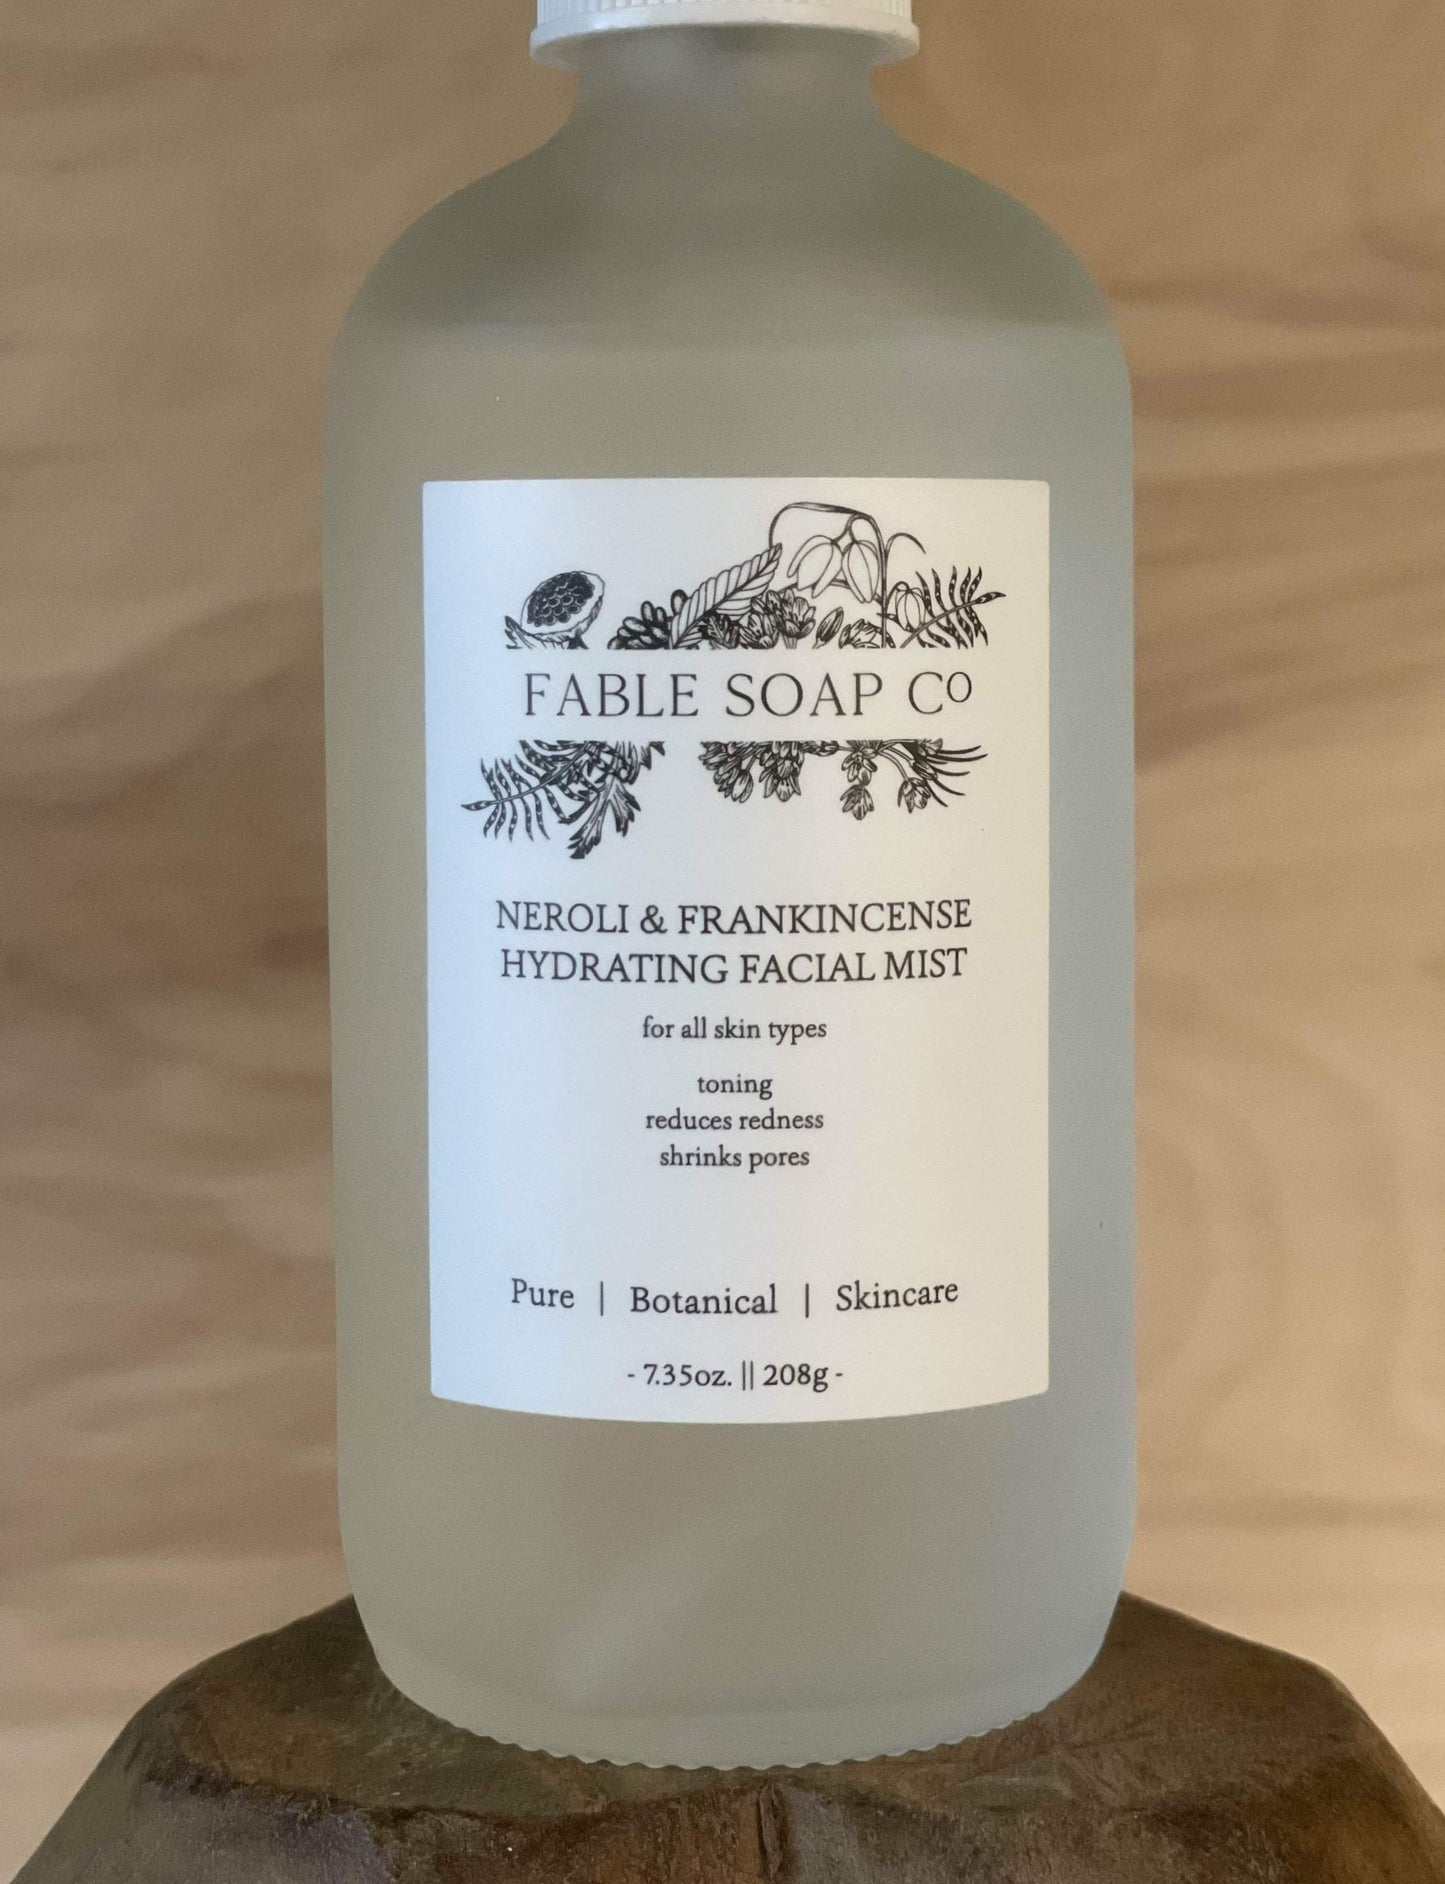 Neroli & Frankincense Hydrating Face Mist-Fable Soap Co.